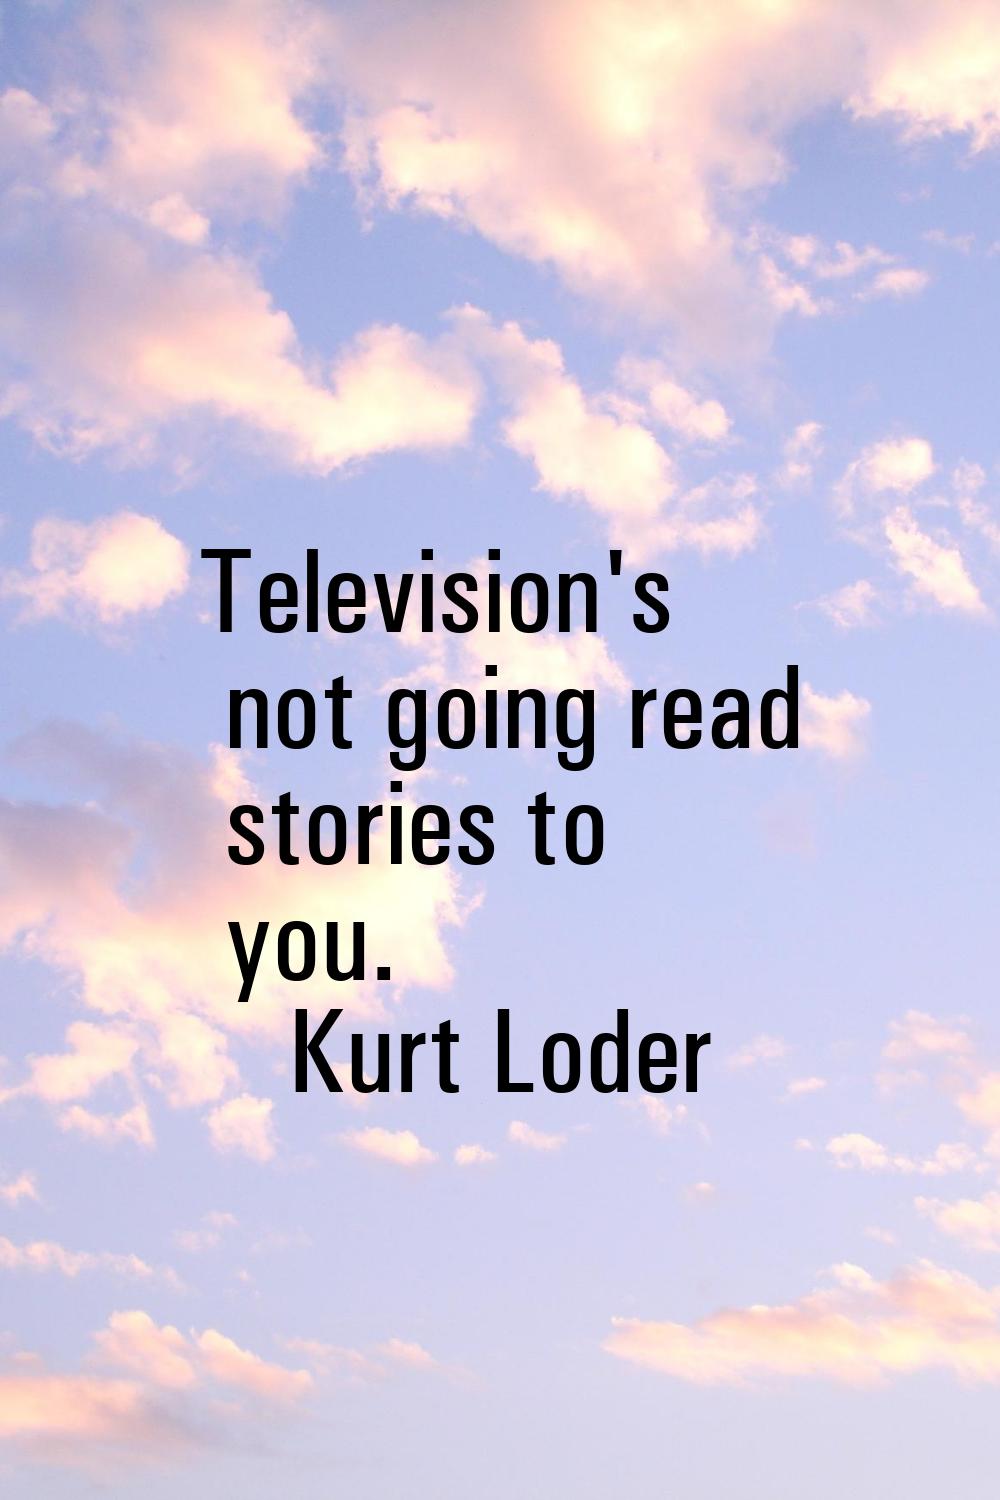 Television's not going read stories to you.